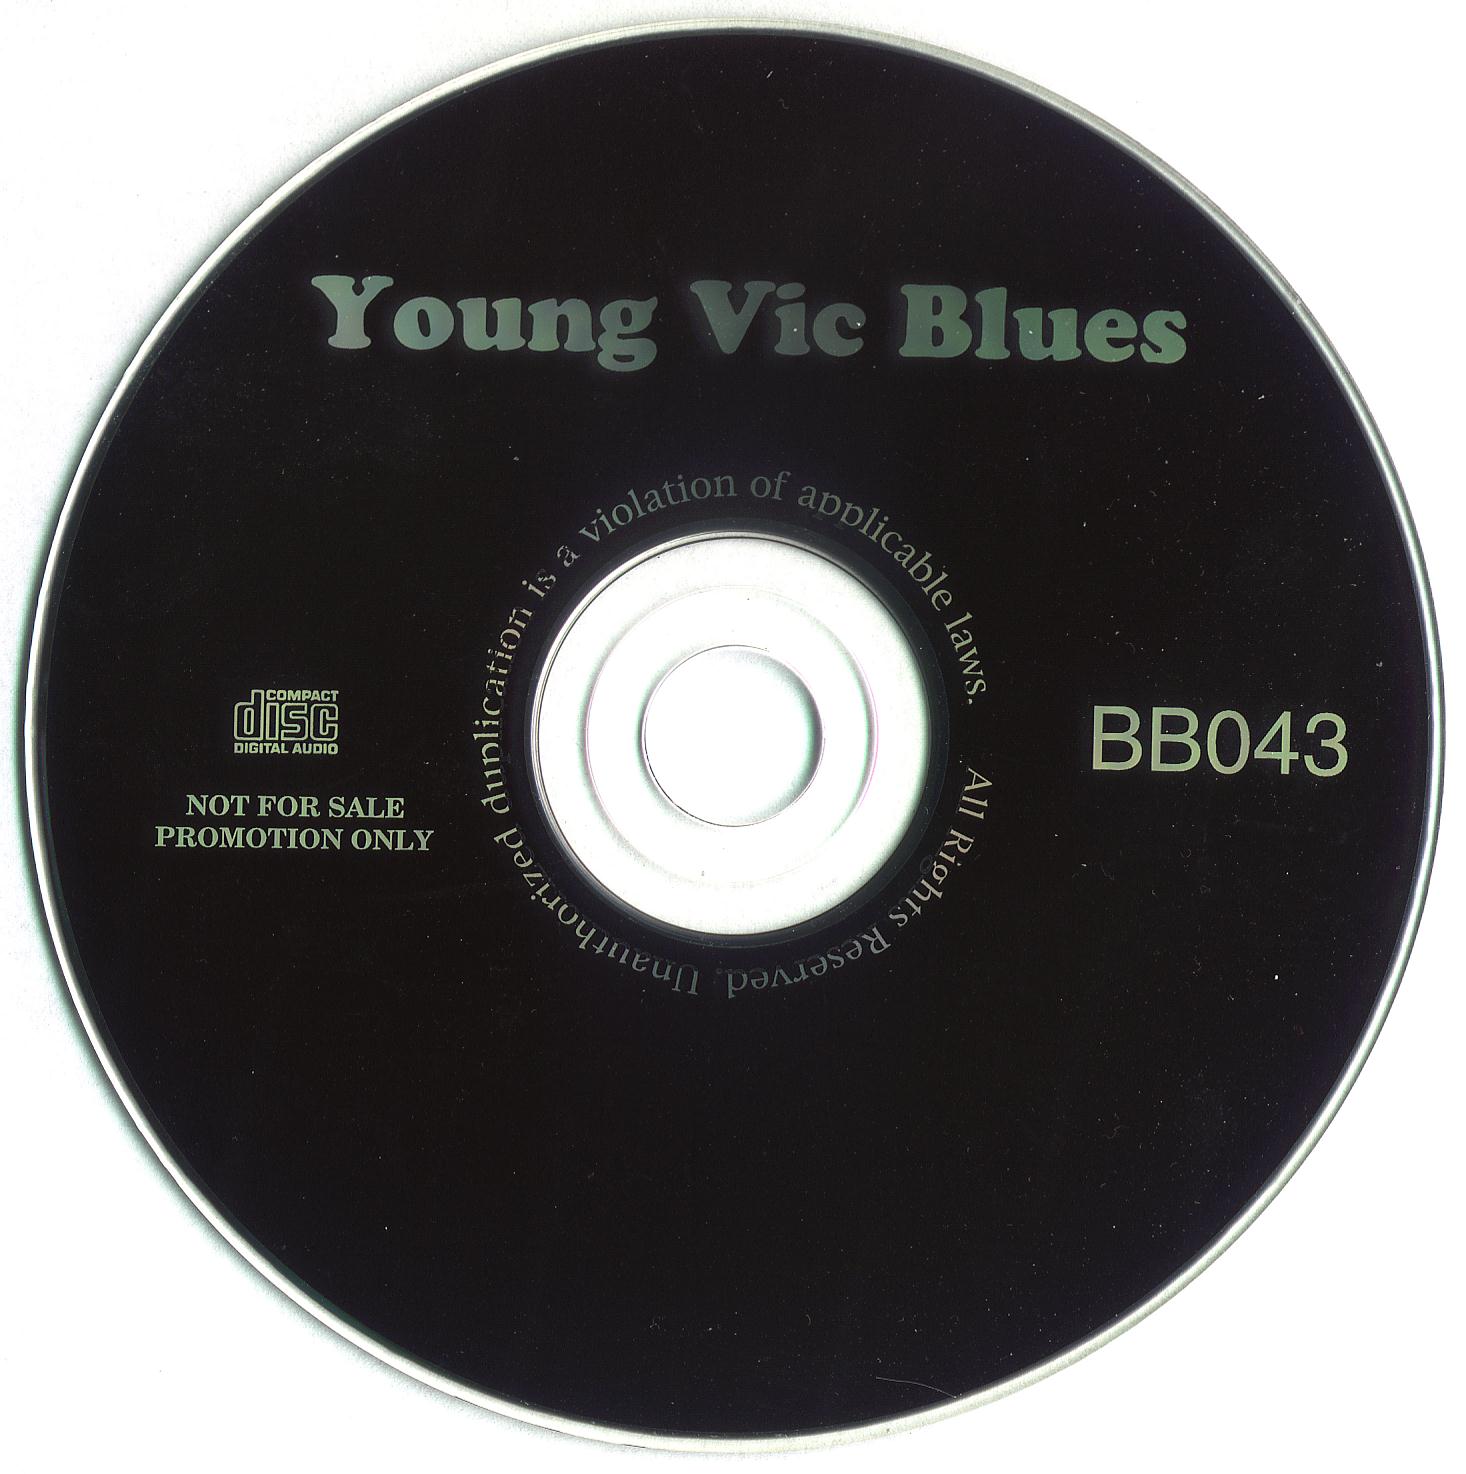 1971-04-26-YOUNG_VIC_BLUES-disc